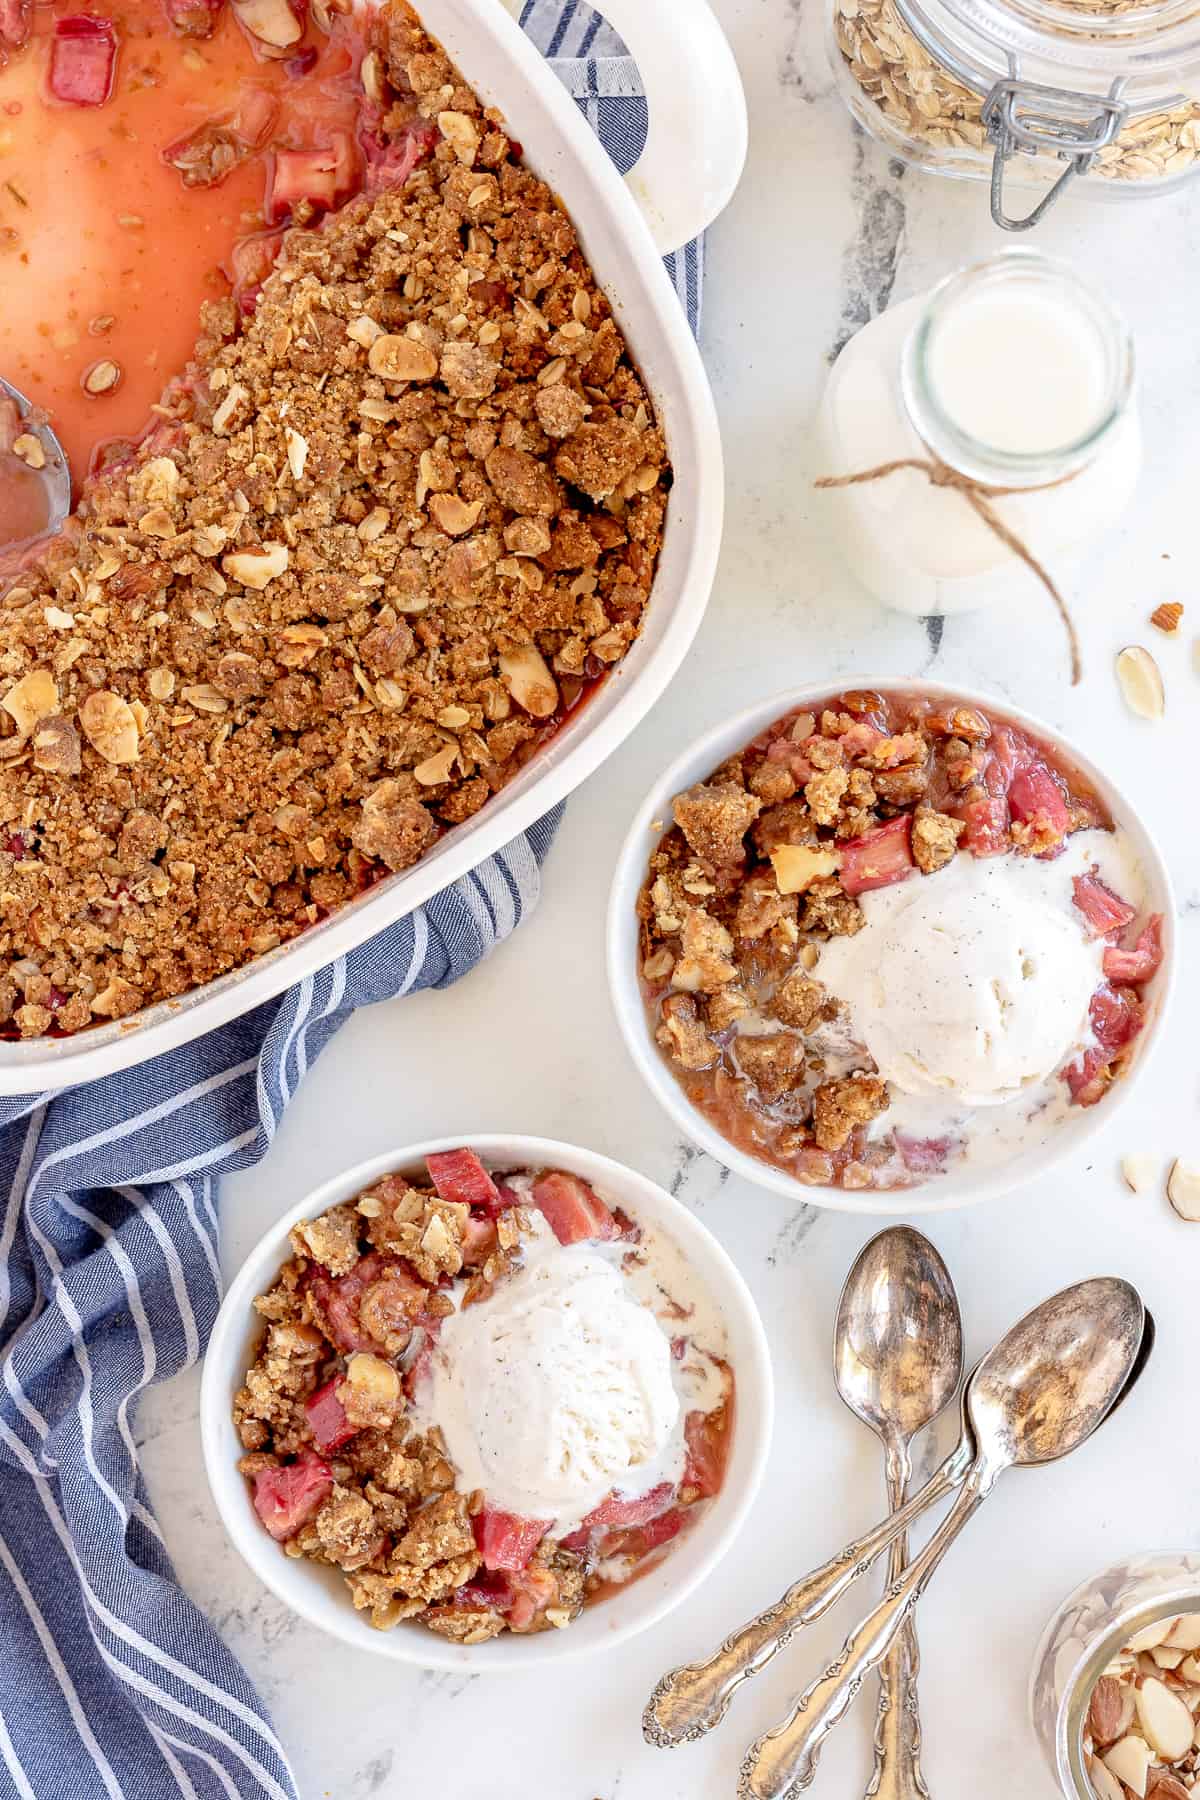 A top down shot of two bowls of rhubarb crisp with melting ice cream.